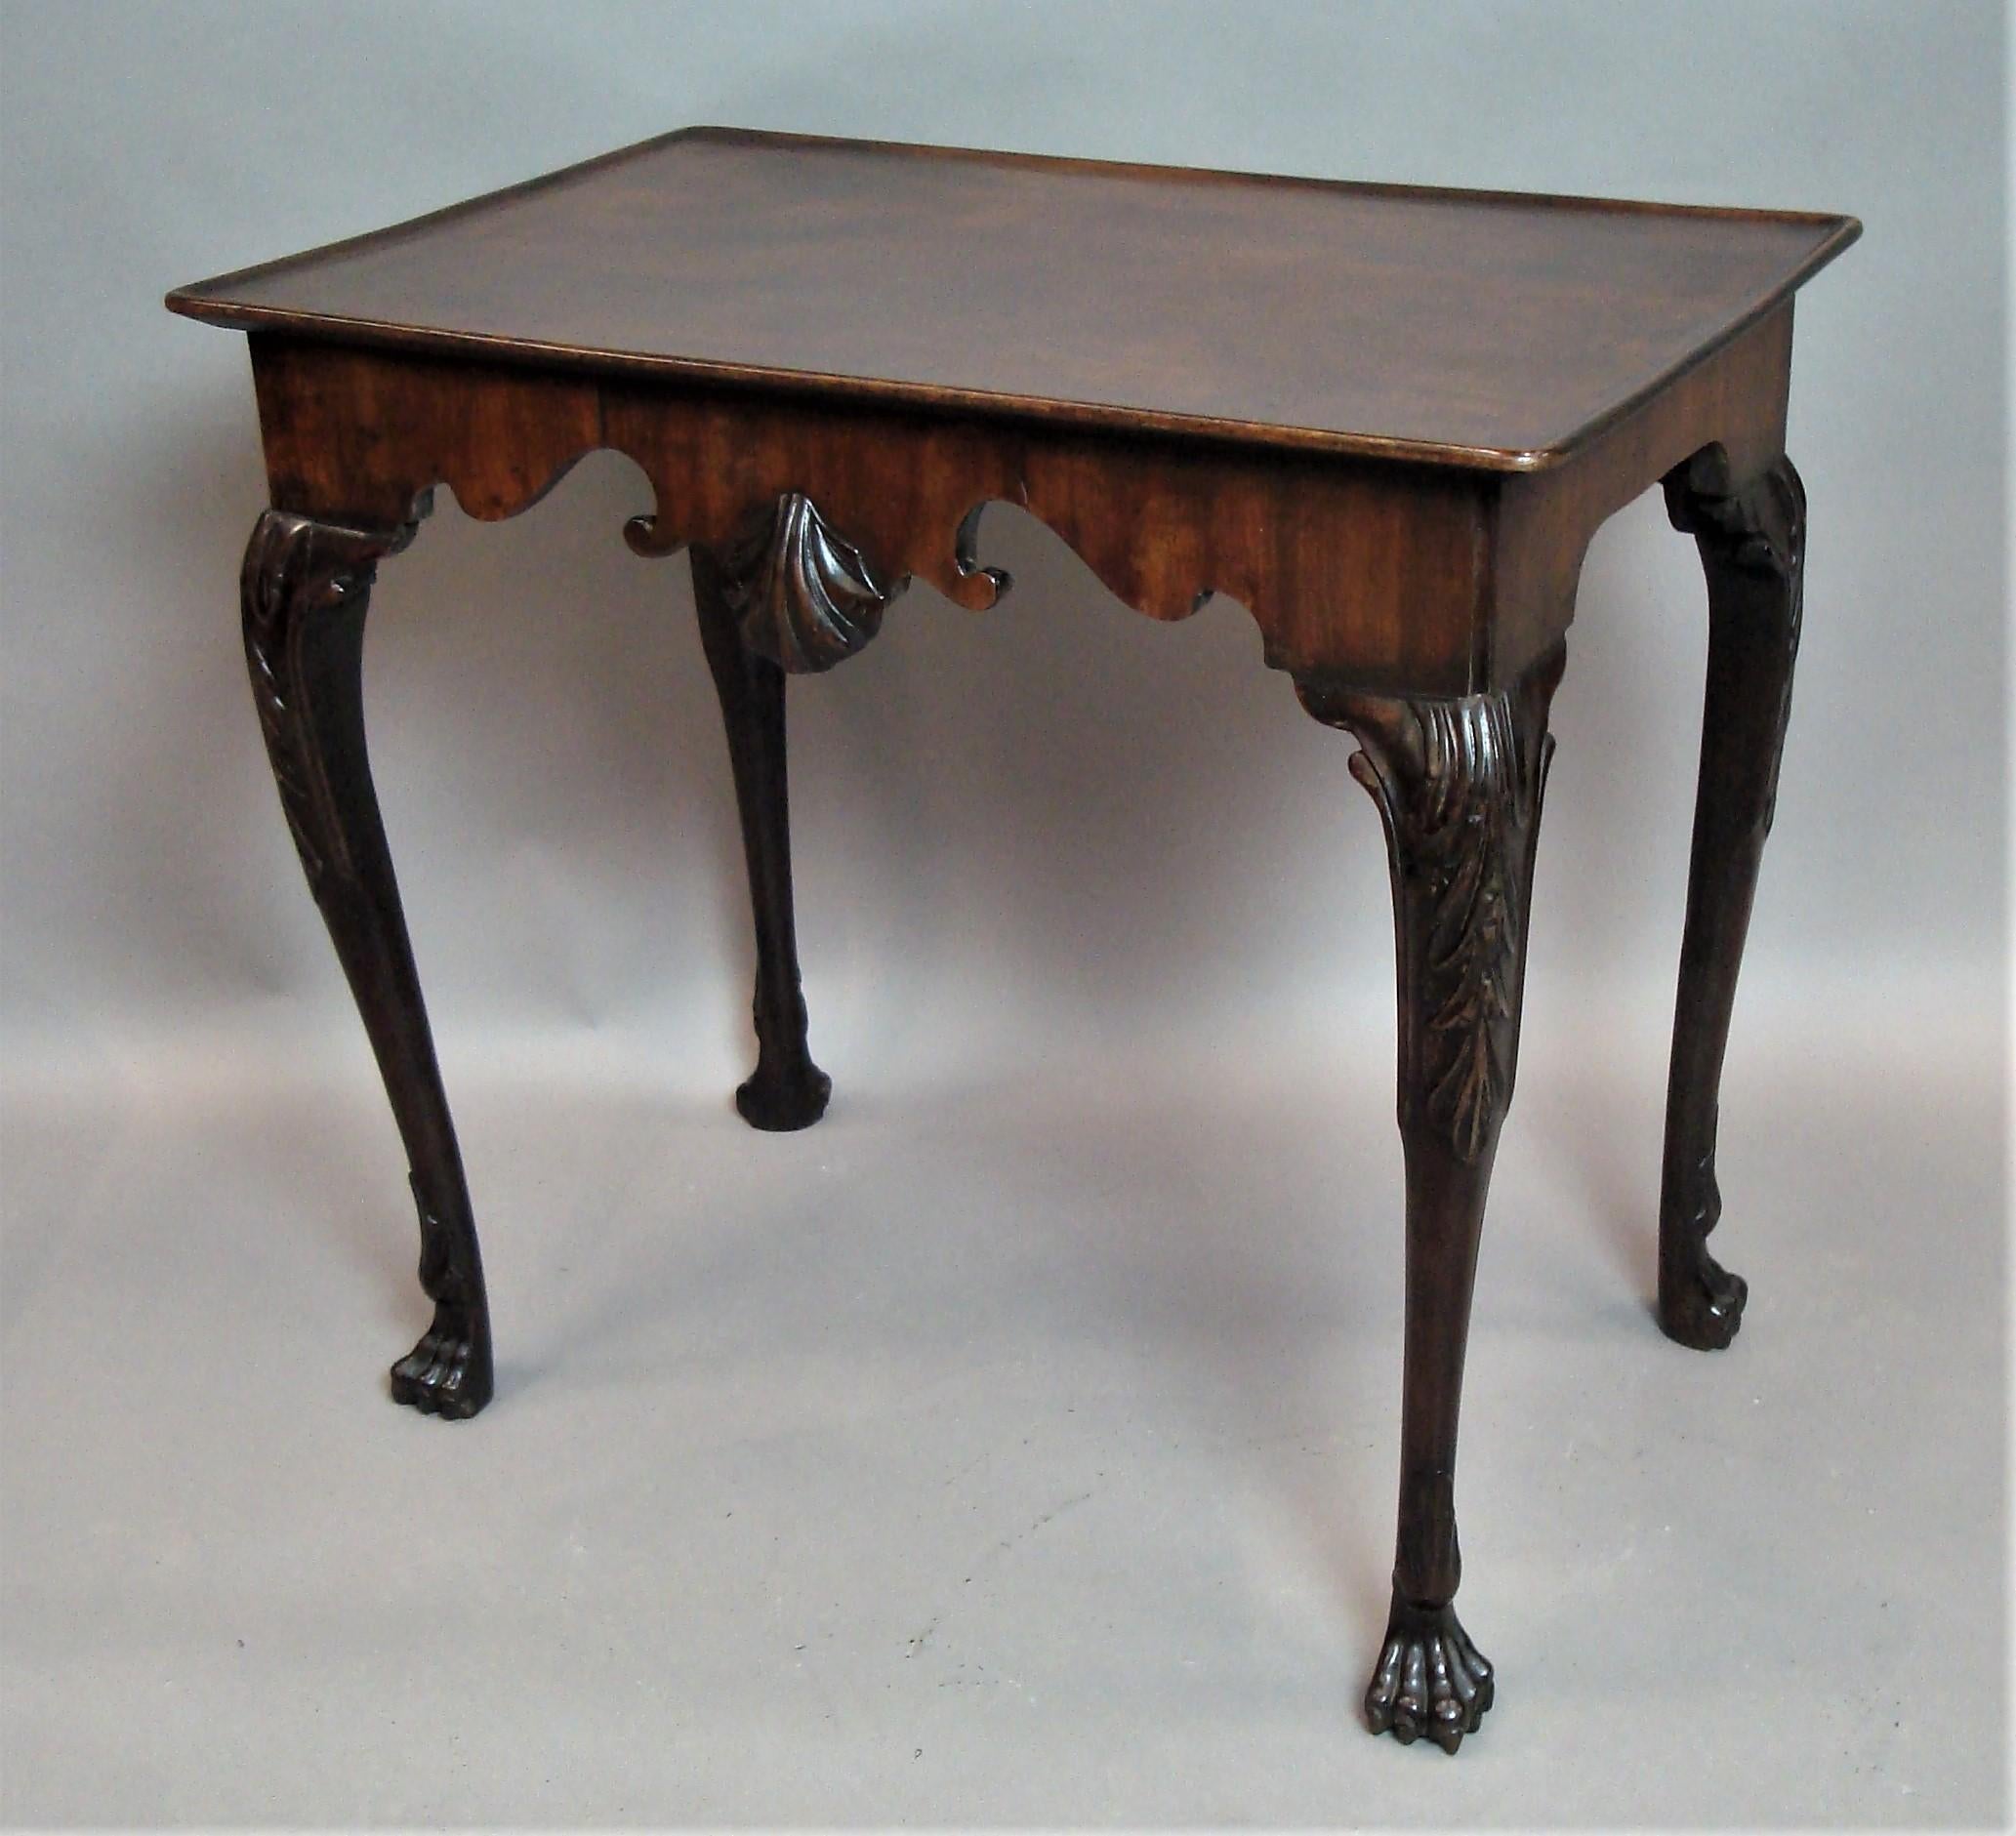 George II Irish Mahogany Silver Table In Good Condition For Sale In Moreton-in-Marsh, Gloucestershire